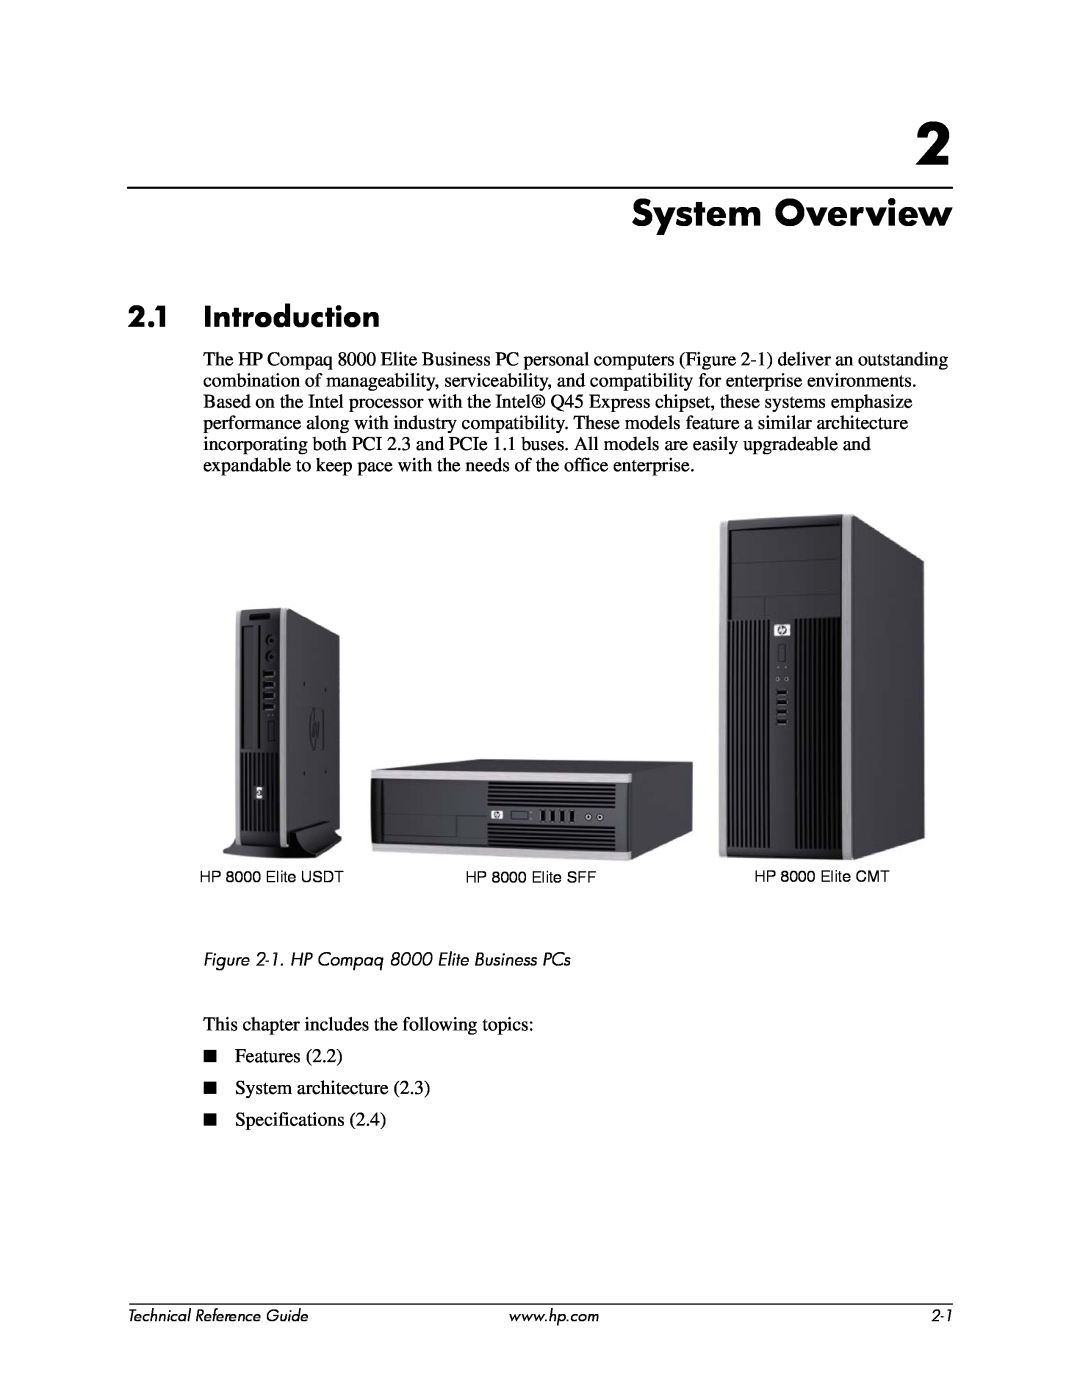 HP 8000 tower manual System Overview, Introduction 